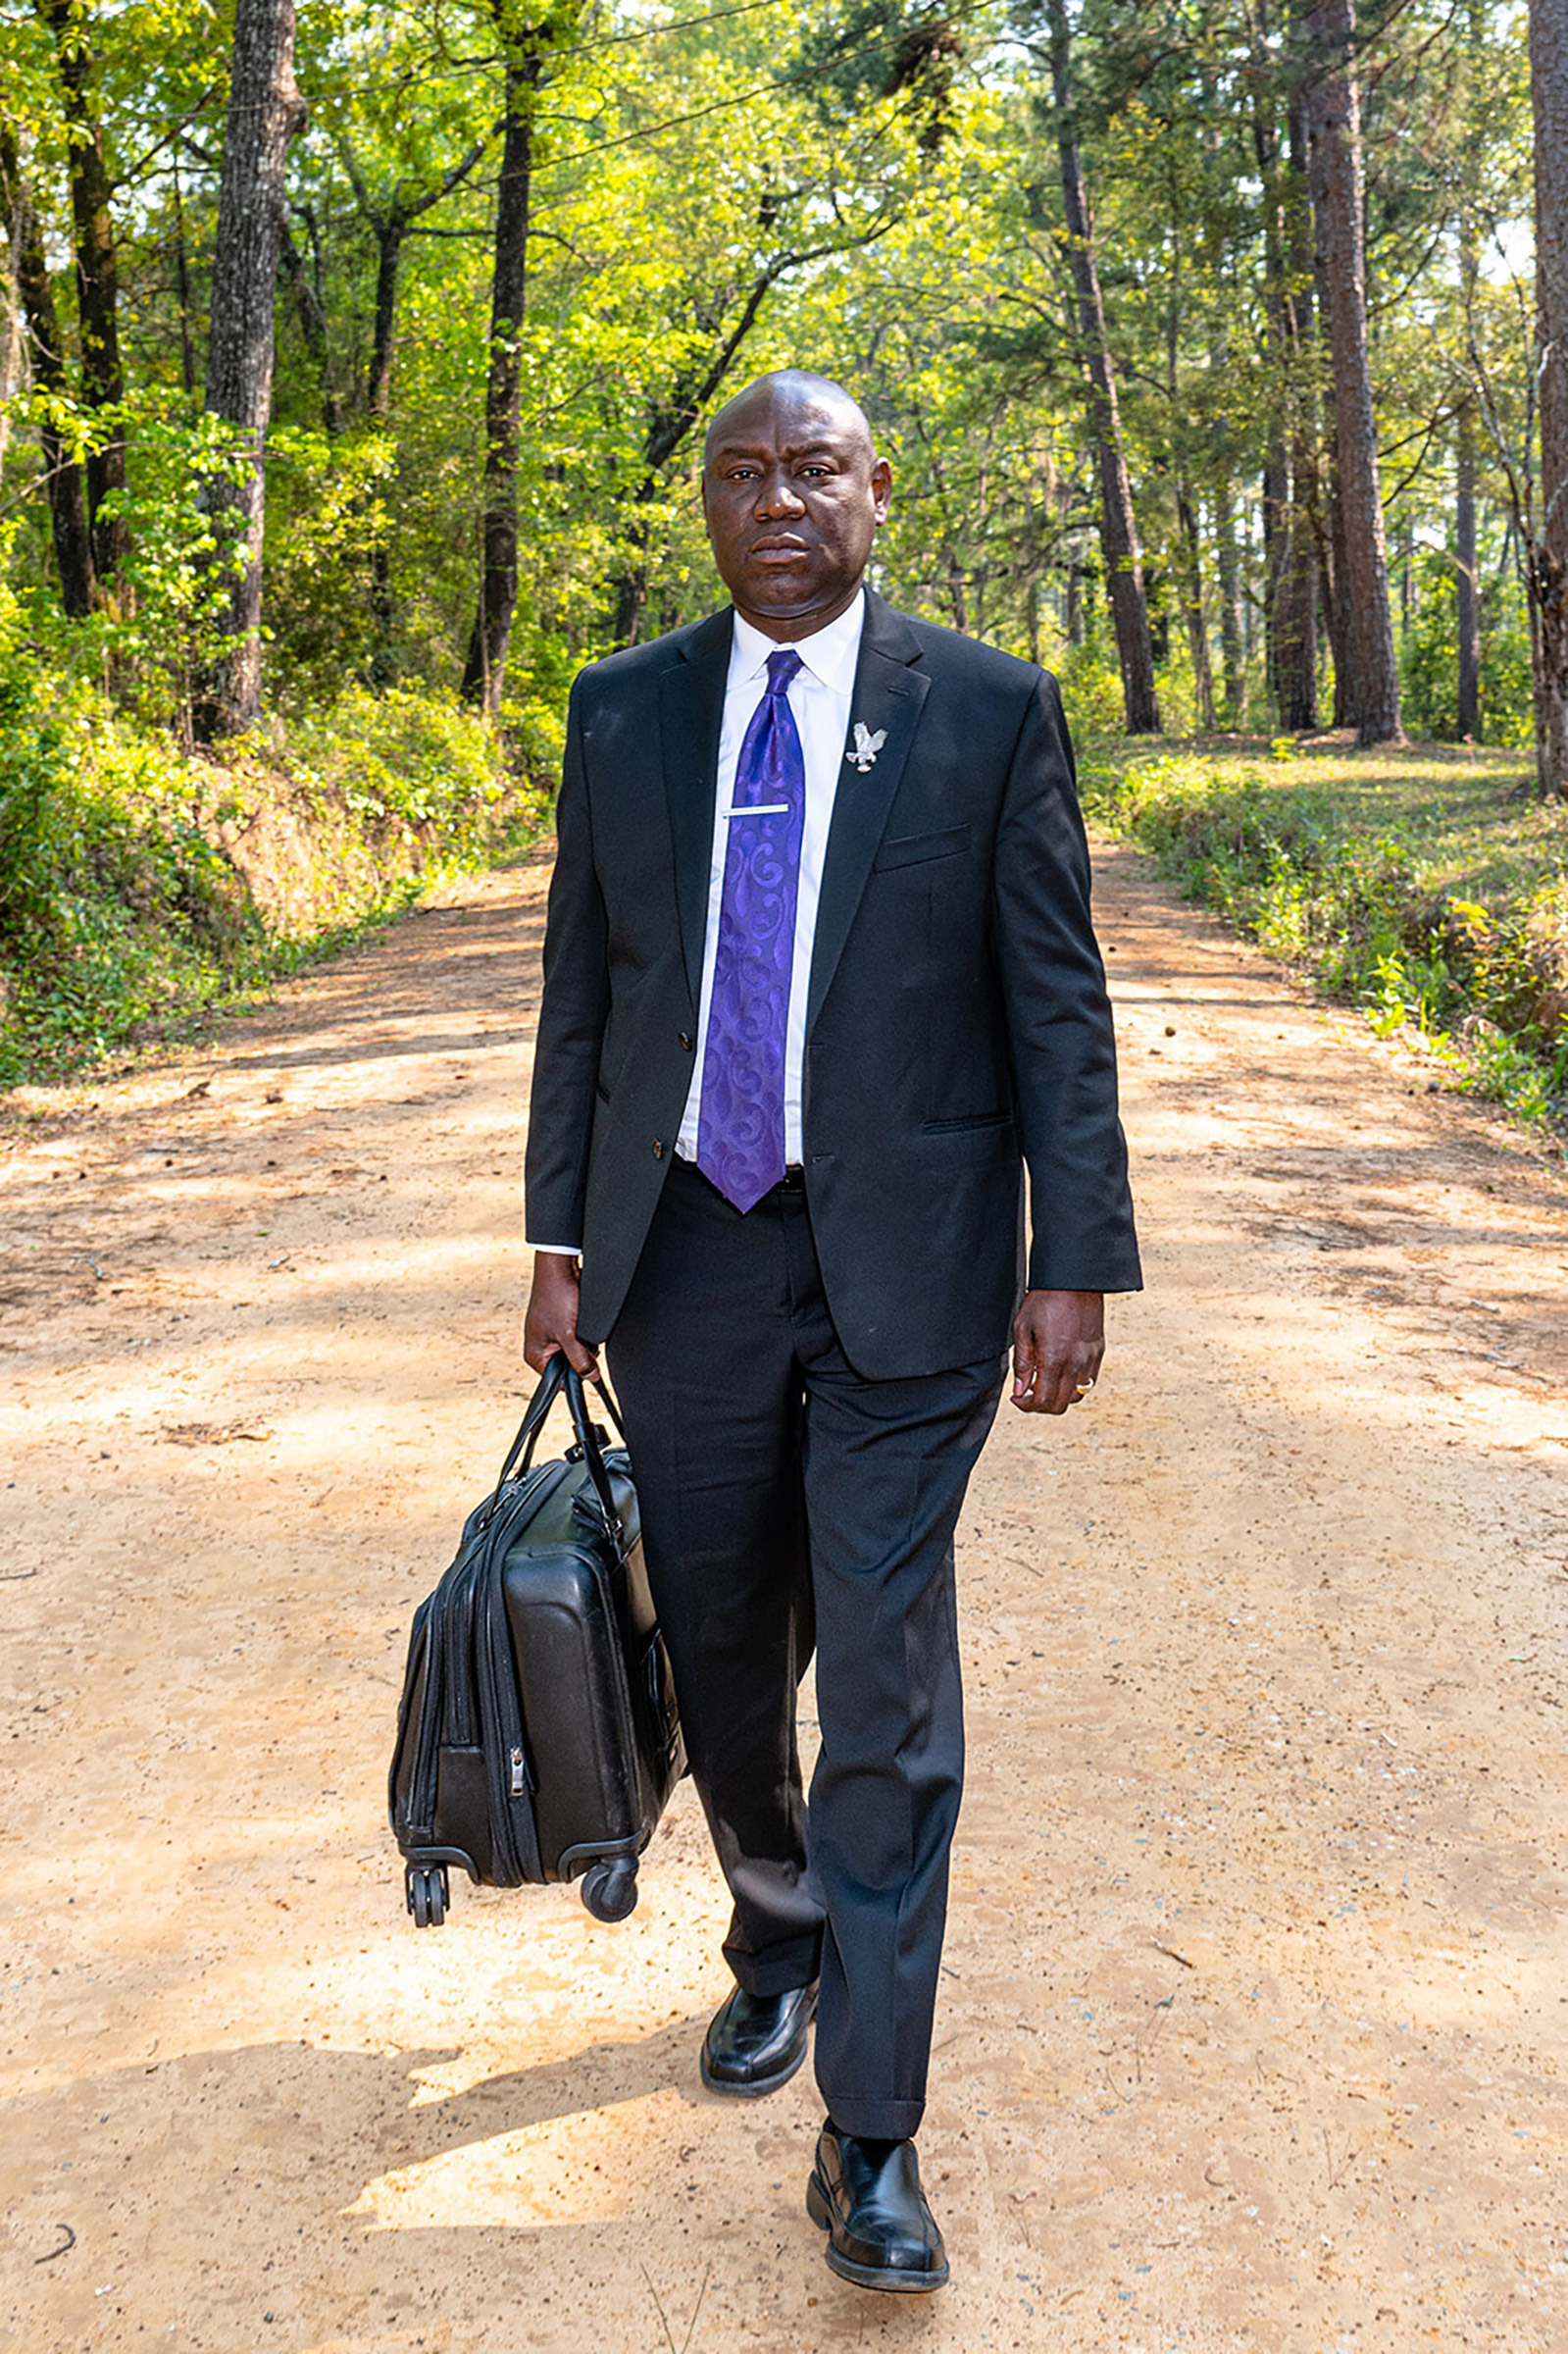 Crump on his way to visit a client in Thomasville, Ga. on April 3. (Ruddy Roye for TIME)